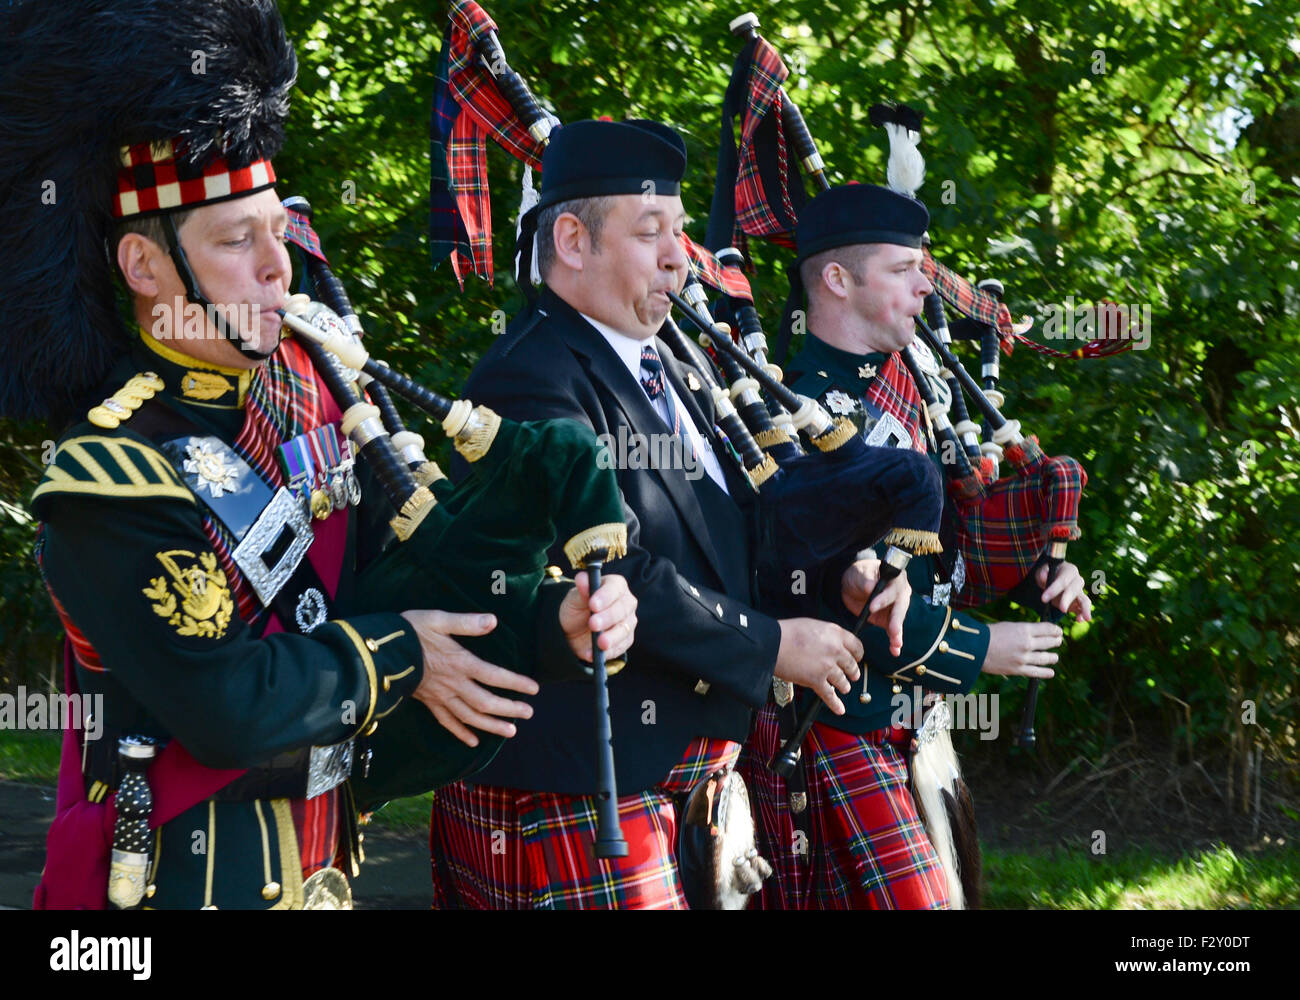 Swinton, UK. 25th Sep, 2015. The Laying of the Commerative VC Stone in the small Scottish Border village of Swinton to mark the 100th Anniversary of the award of the Victoria Cross to Piper Daniel Laidlaw for his actions whilst serving with the 7th Battalion of the King's Own Scottish Borderers.   Daniel Logan Laidlaw was born at Little Swinton, Berwickshire on 26 July 1875 and joined the Army in 1896. He served with the Durham Light Infantry in India where he received a certificate for his work during a plague outbreak in Bombay in 1898. Stock Photo